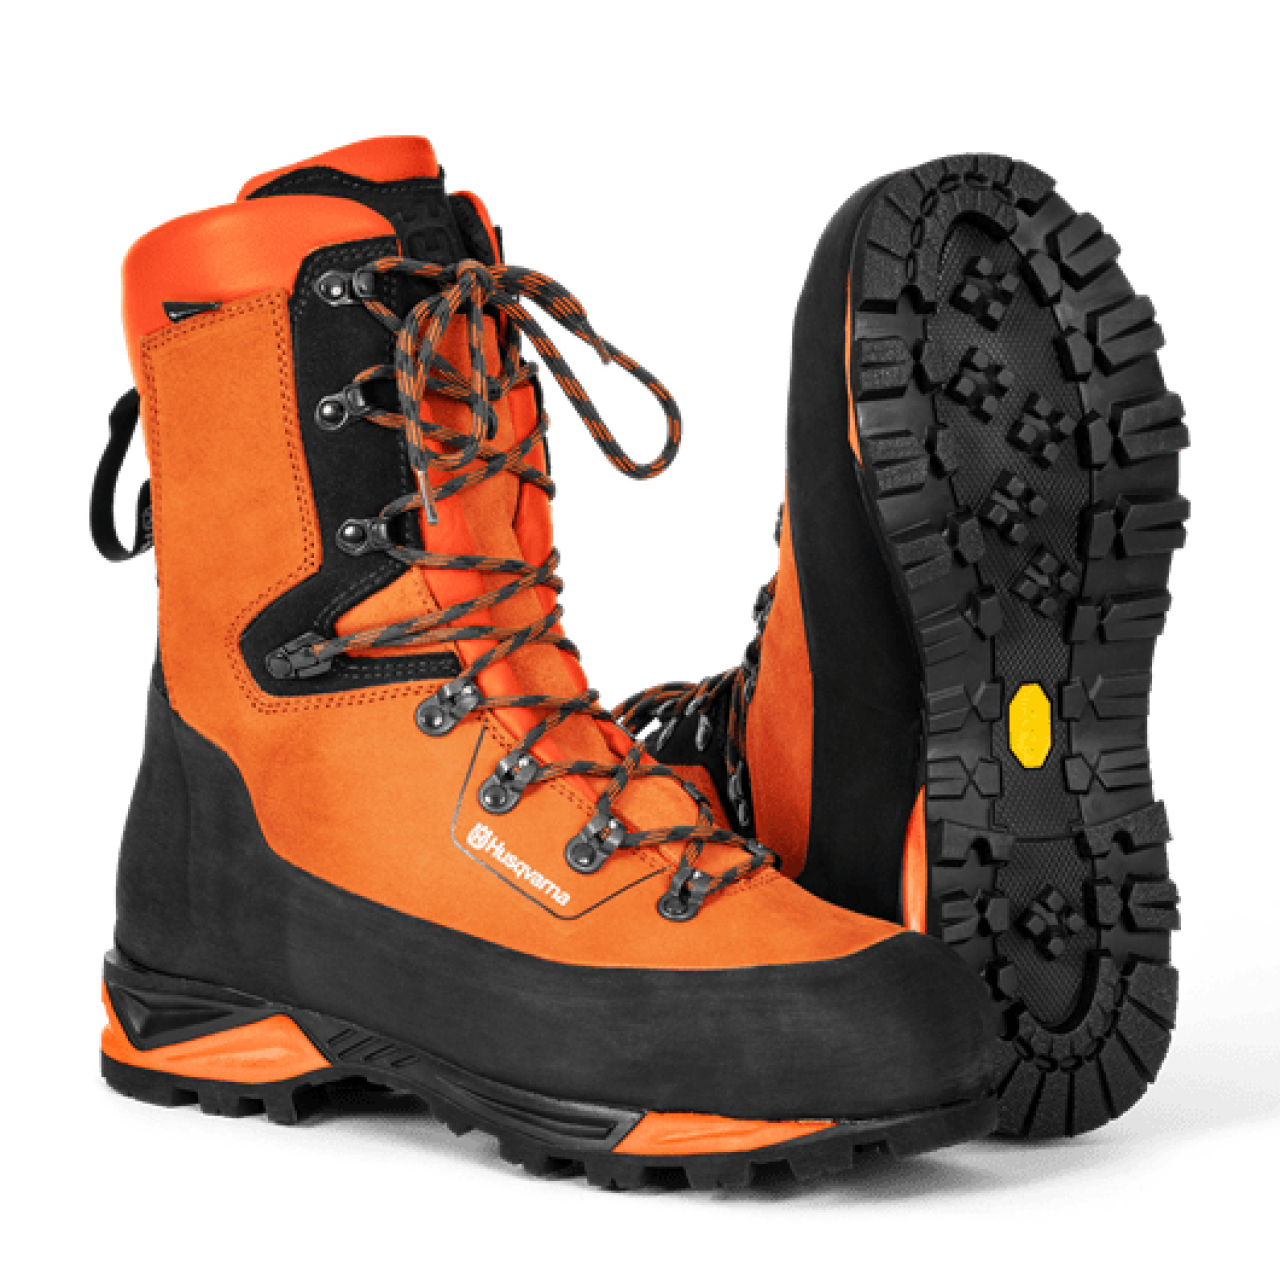 Stiefel Technical 24 Level 2